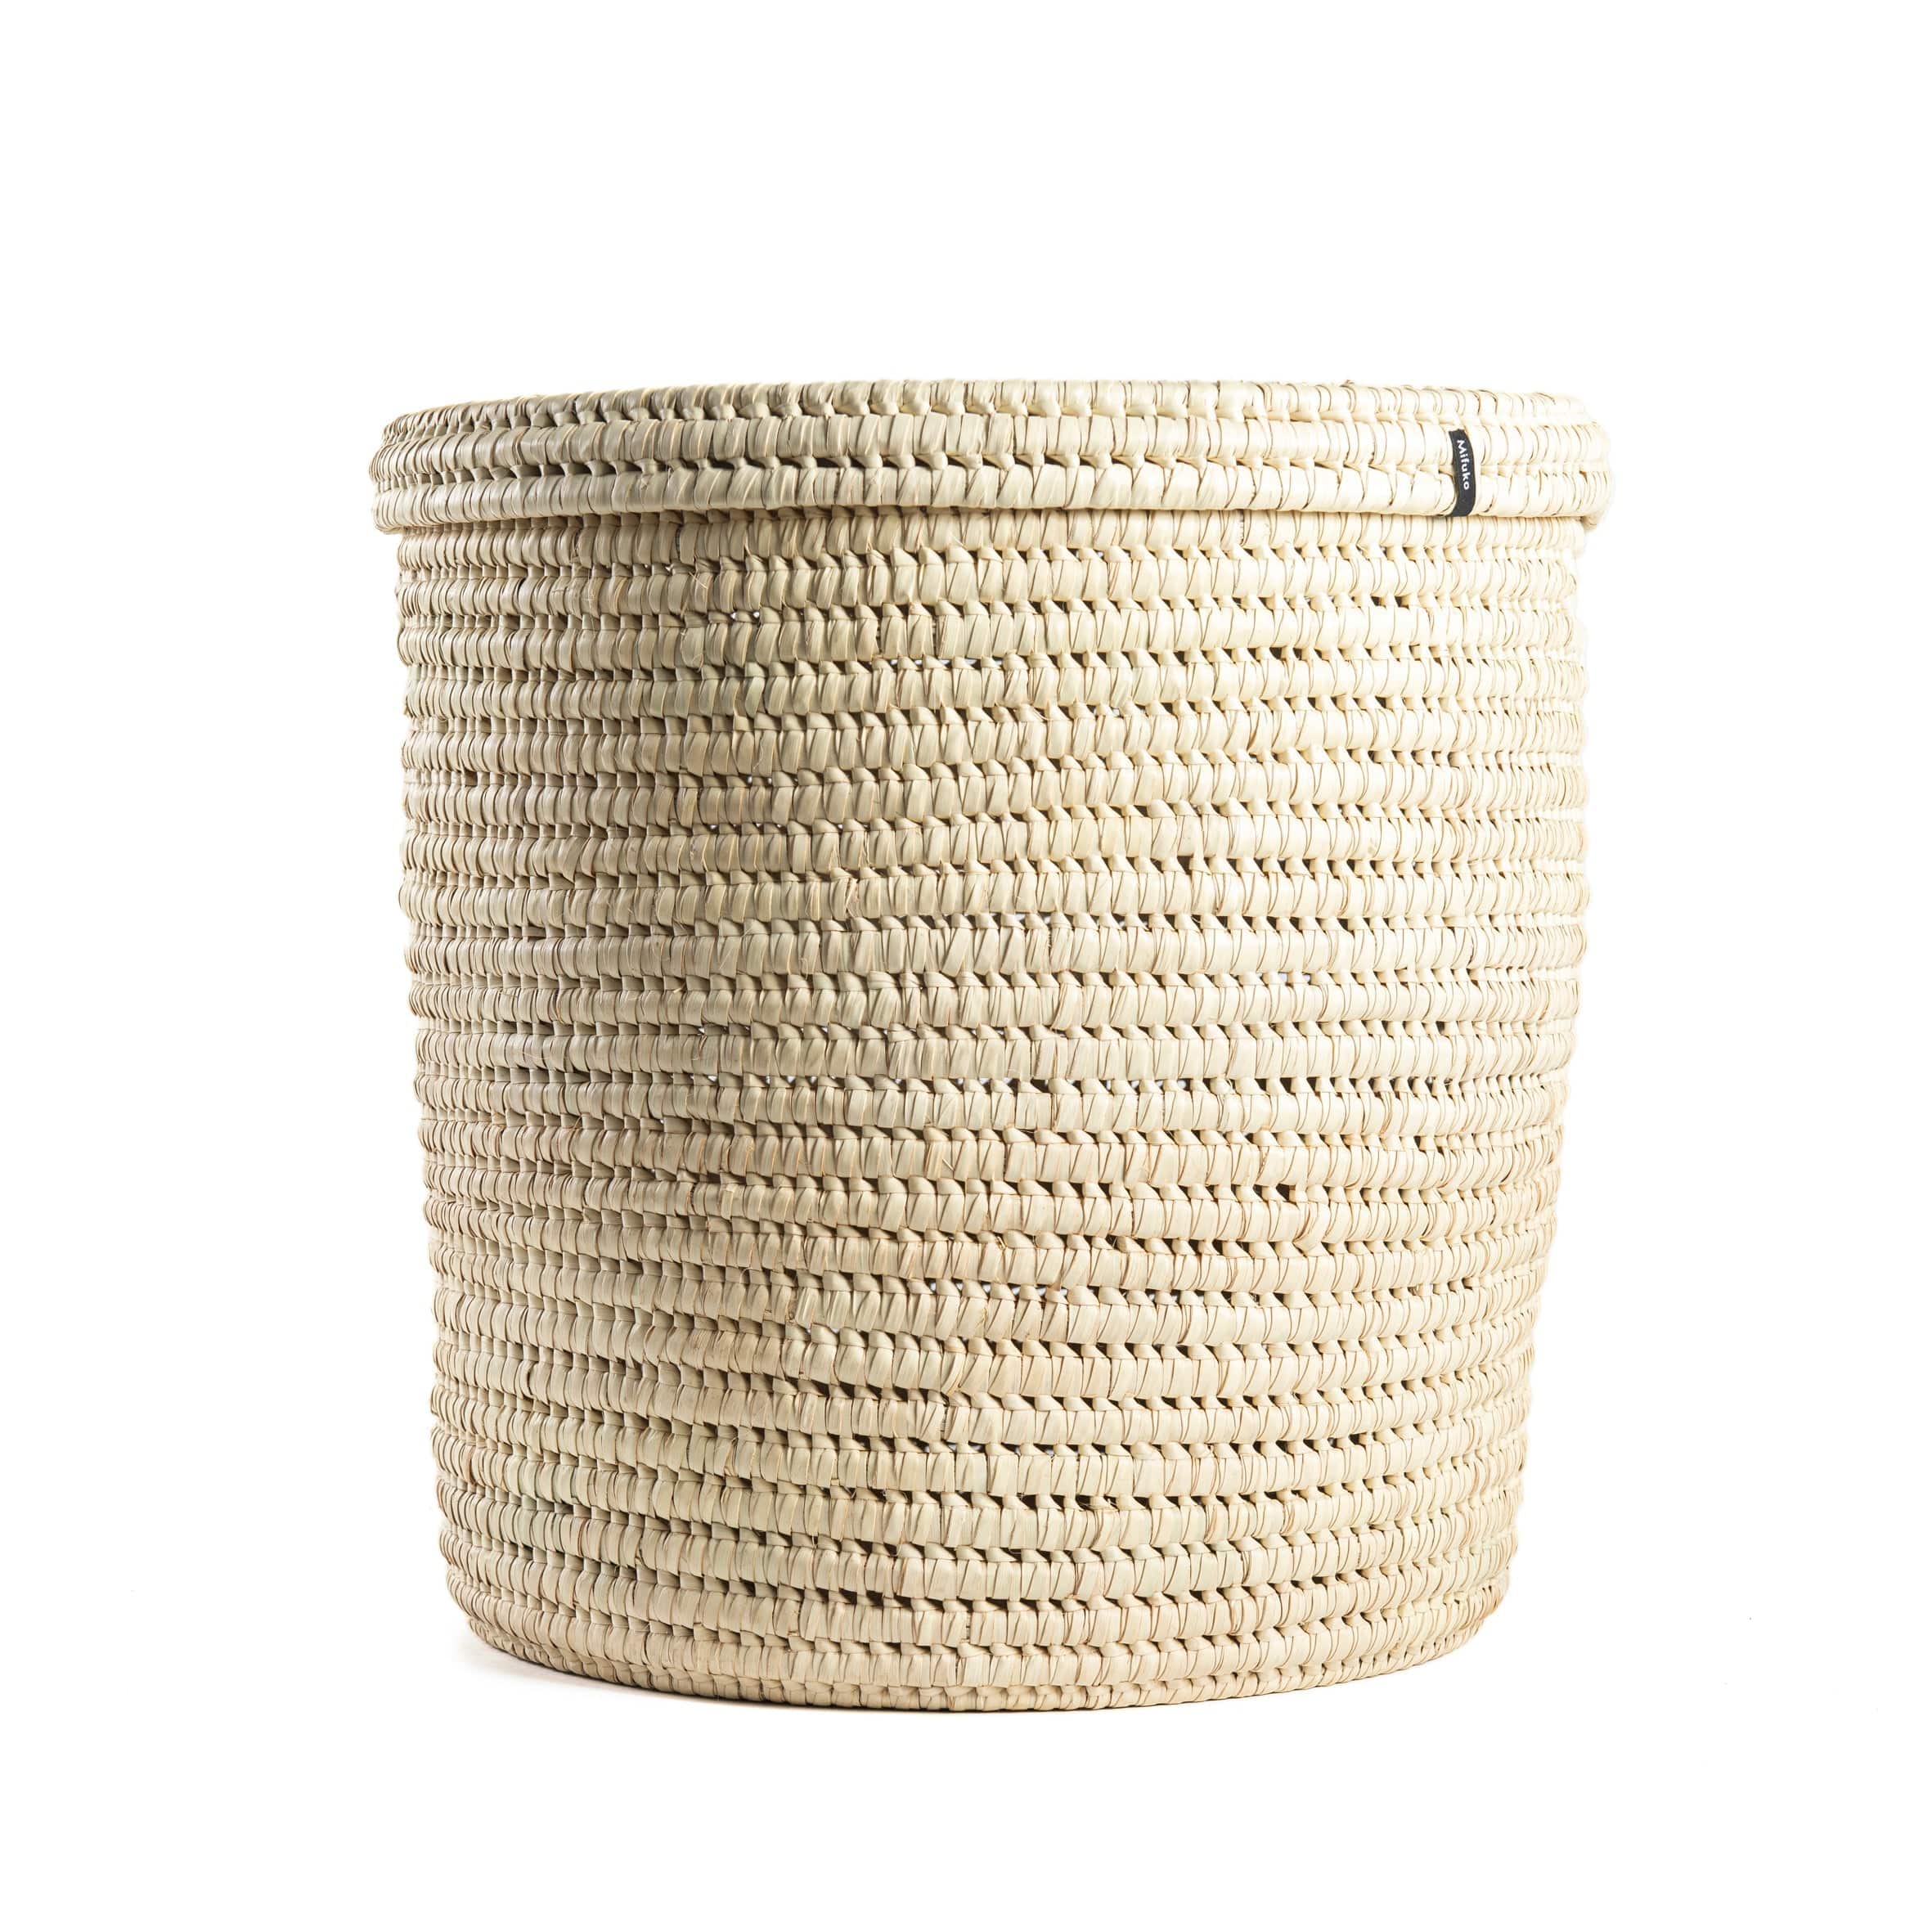 Mifuko Palm tree leaves Basket with lid M Turkana basket with lid | Natural